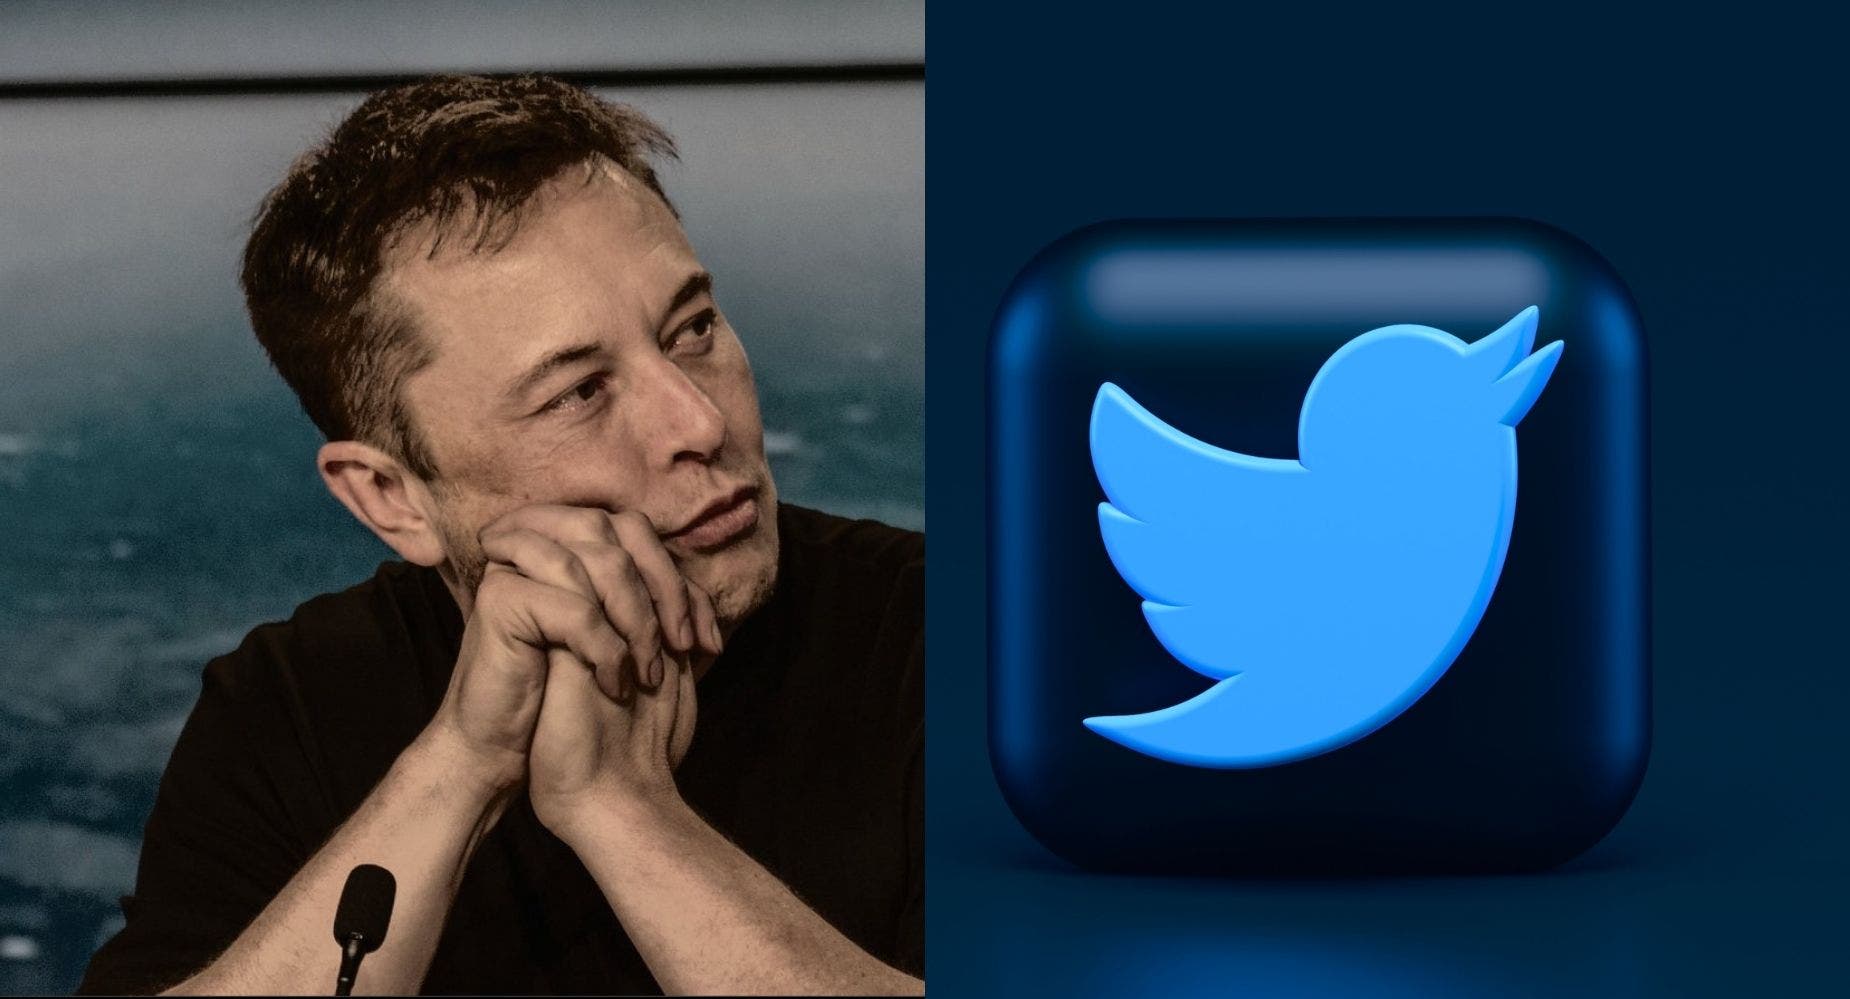 What Will Elon Musk Do With Twitter? Will Tesla, SpaceX Suffer? Analyst Weighs In Following Revived Deal